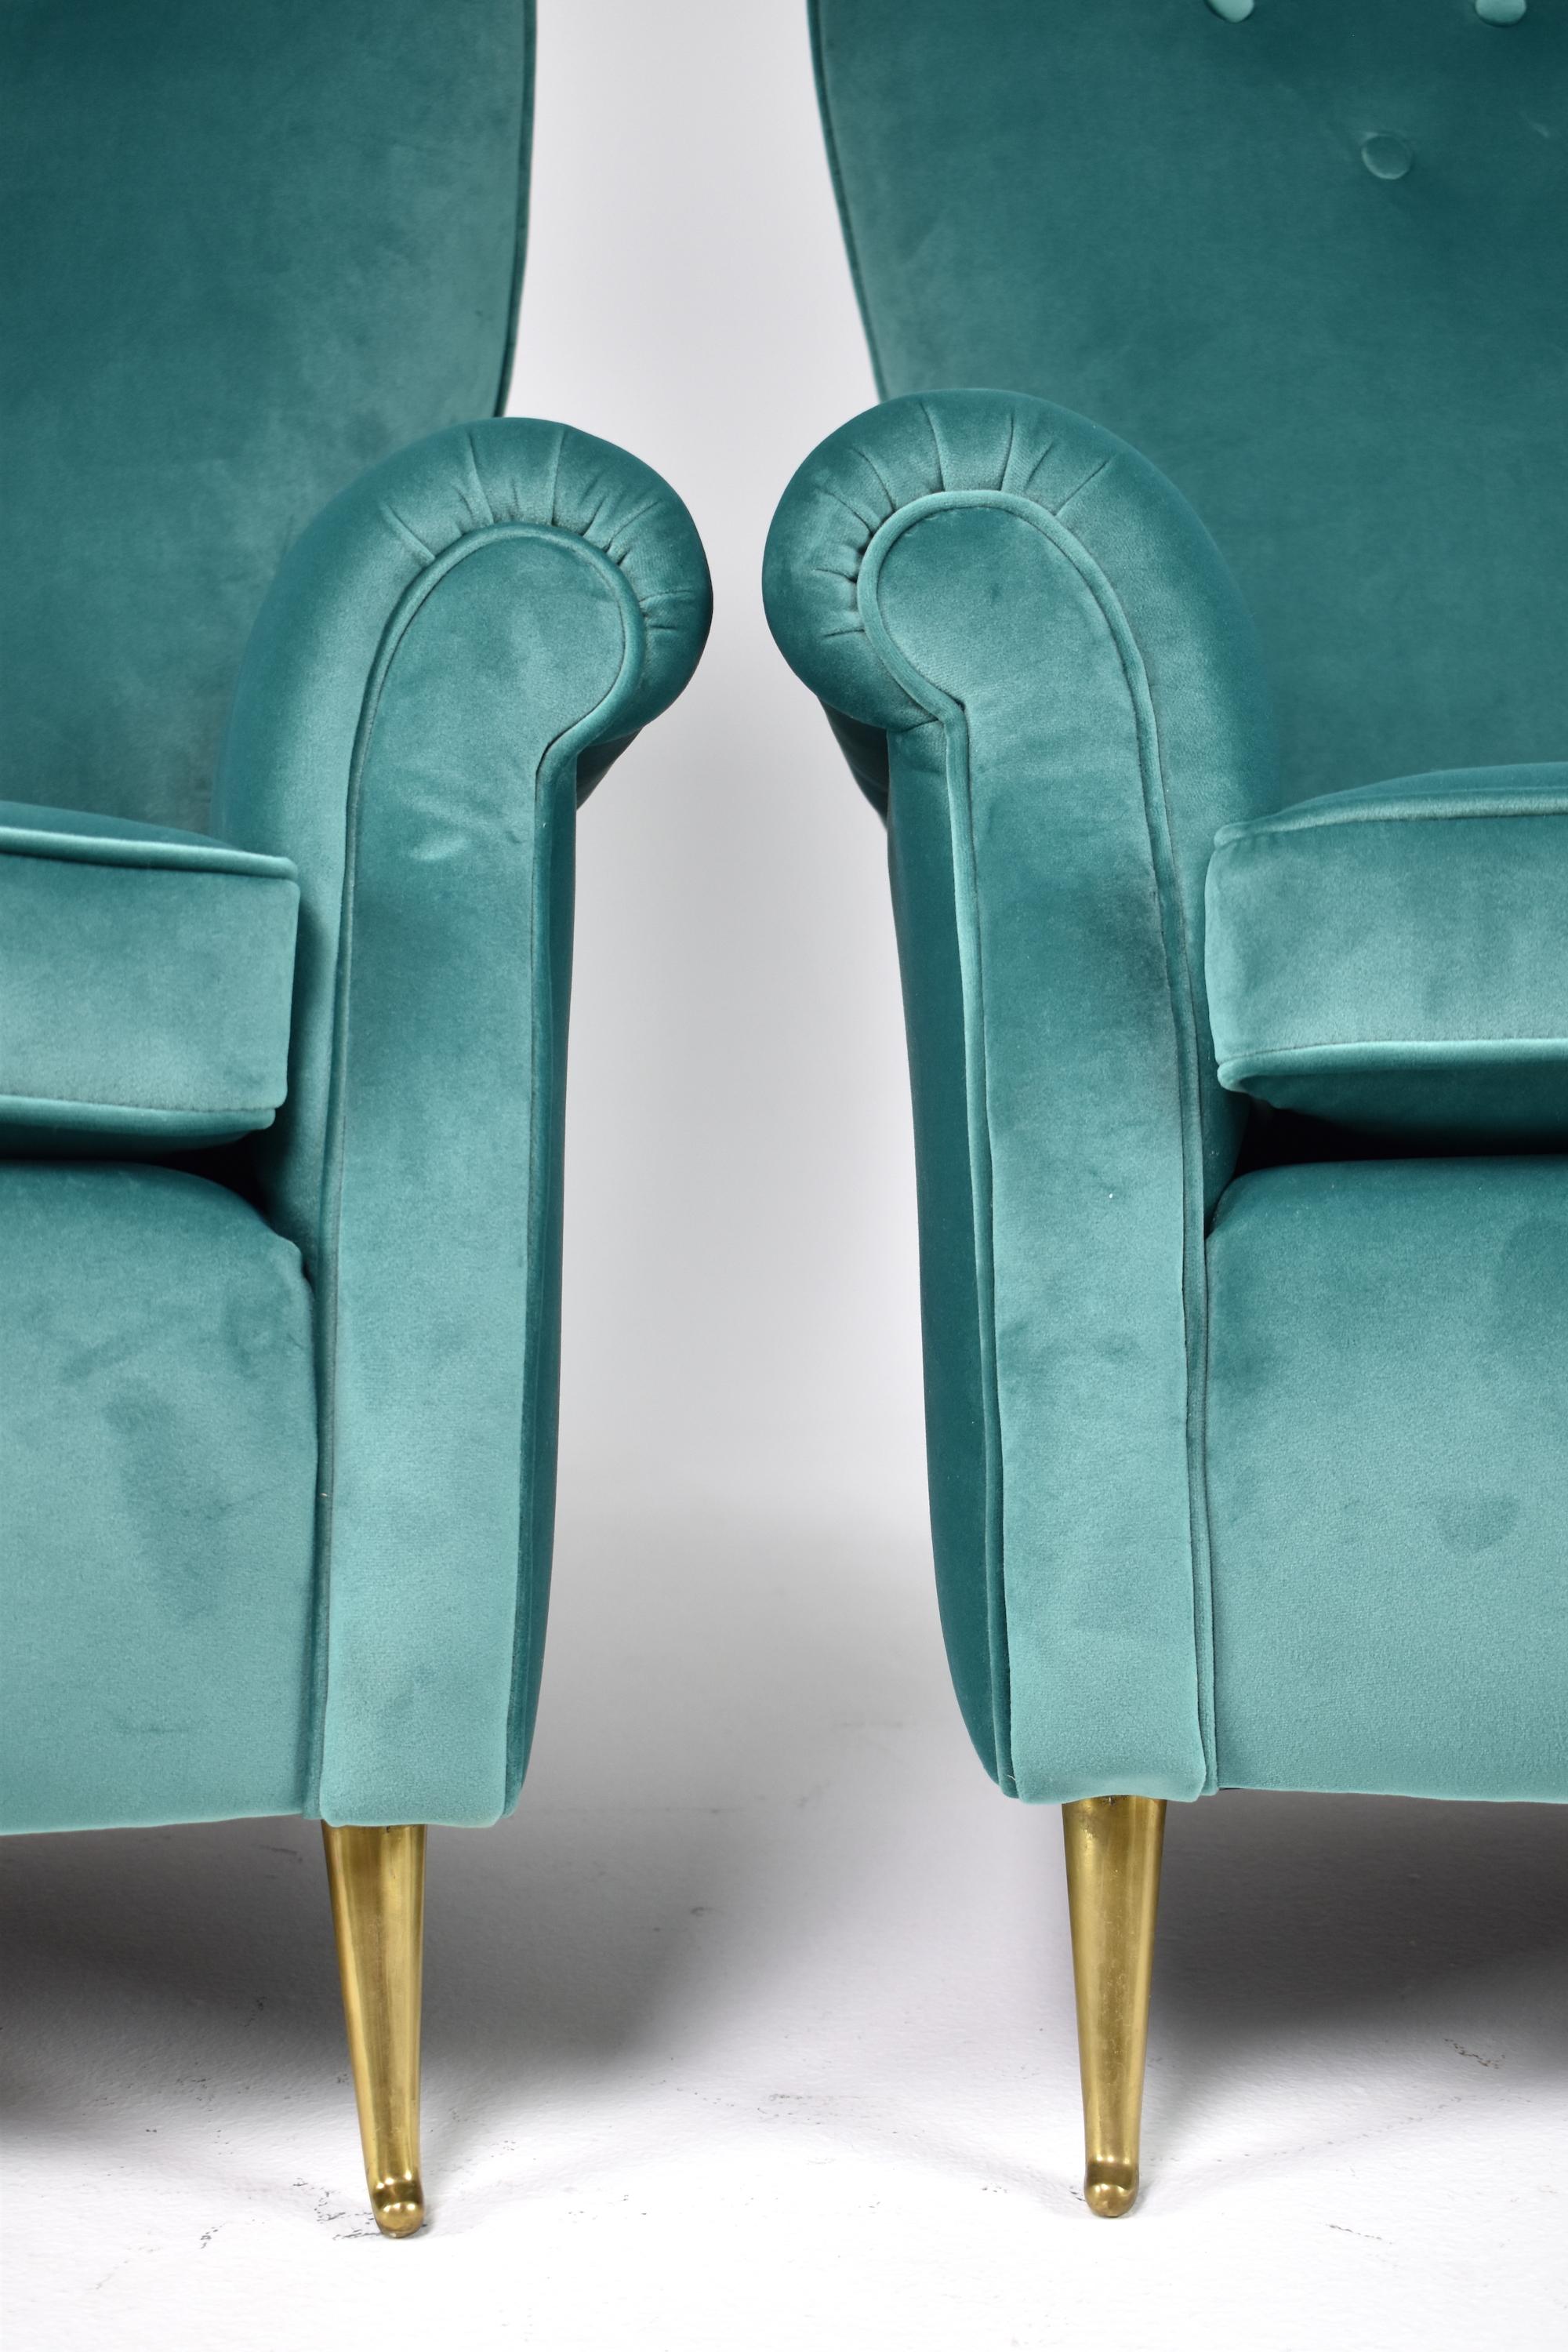 Italian Midcentury Armchairs by ISA Bergamo, Set of Two, 1950s For Sale 3